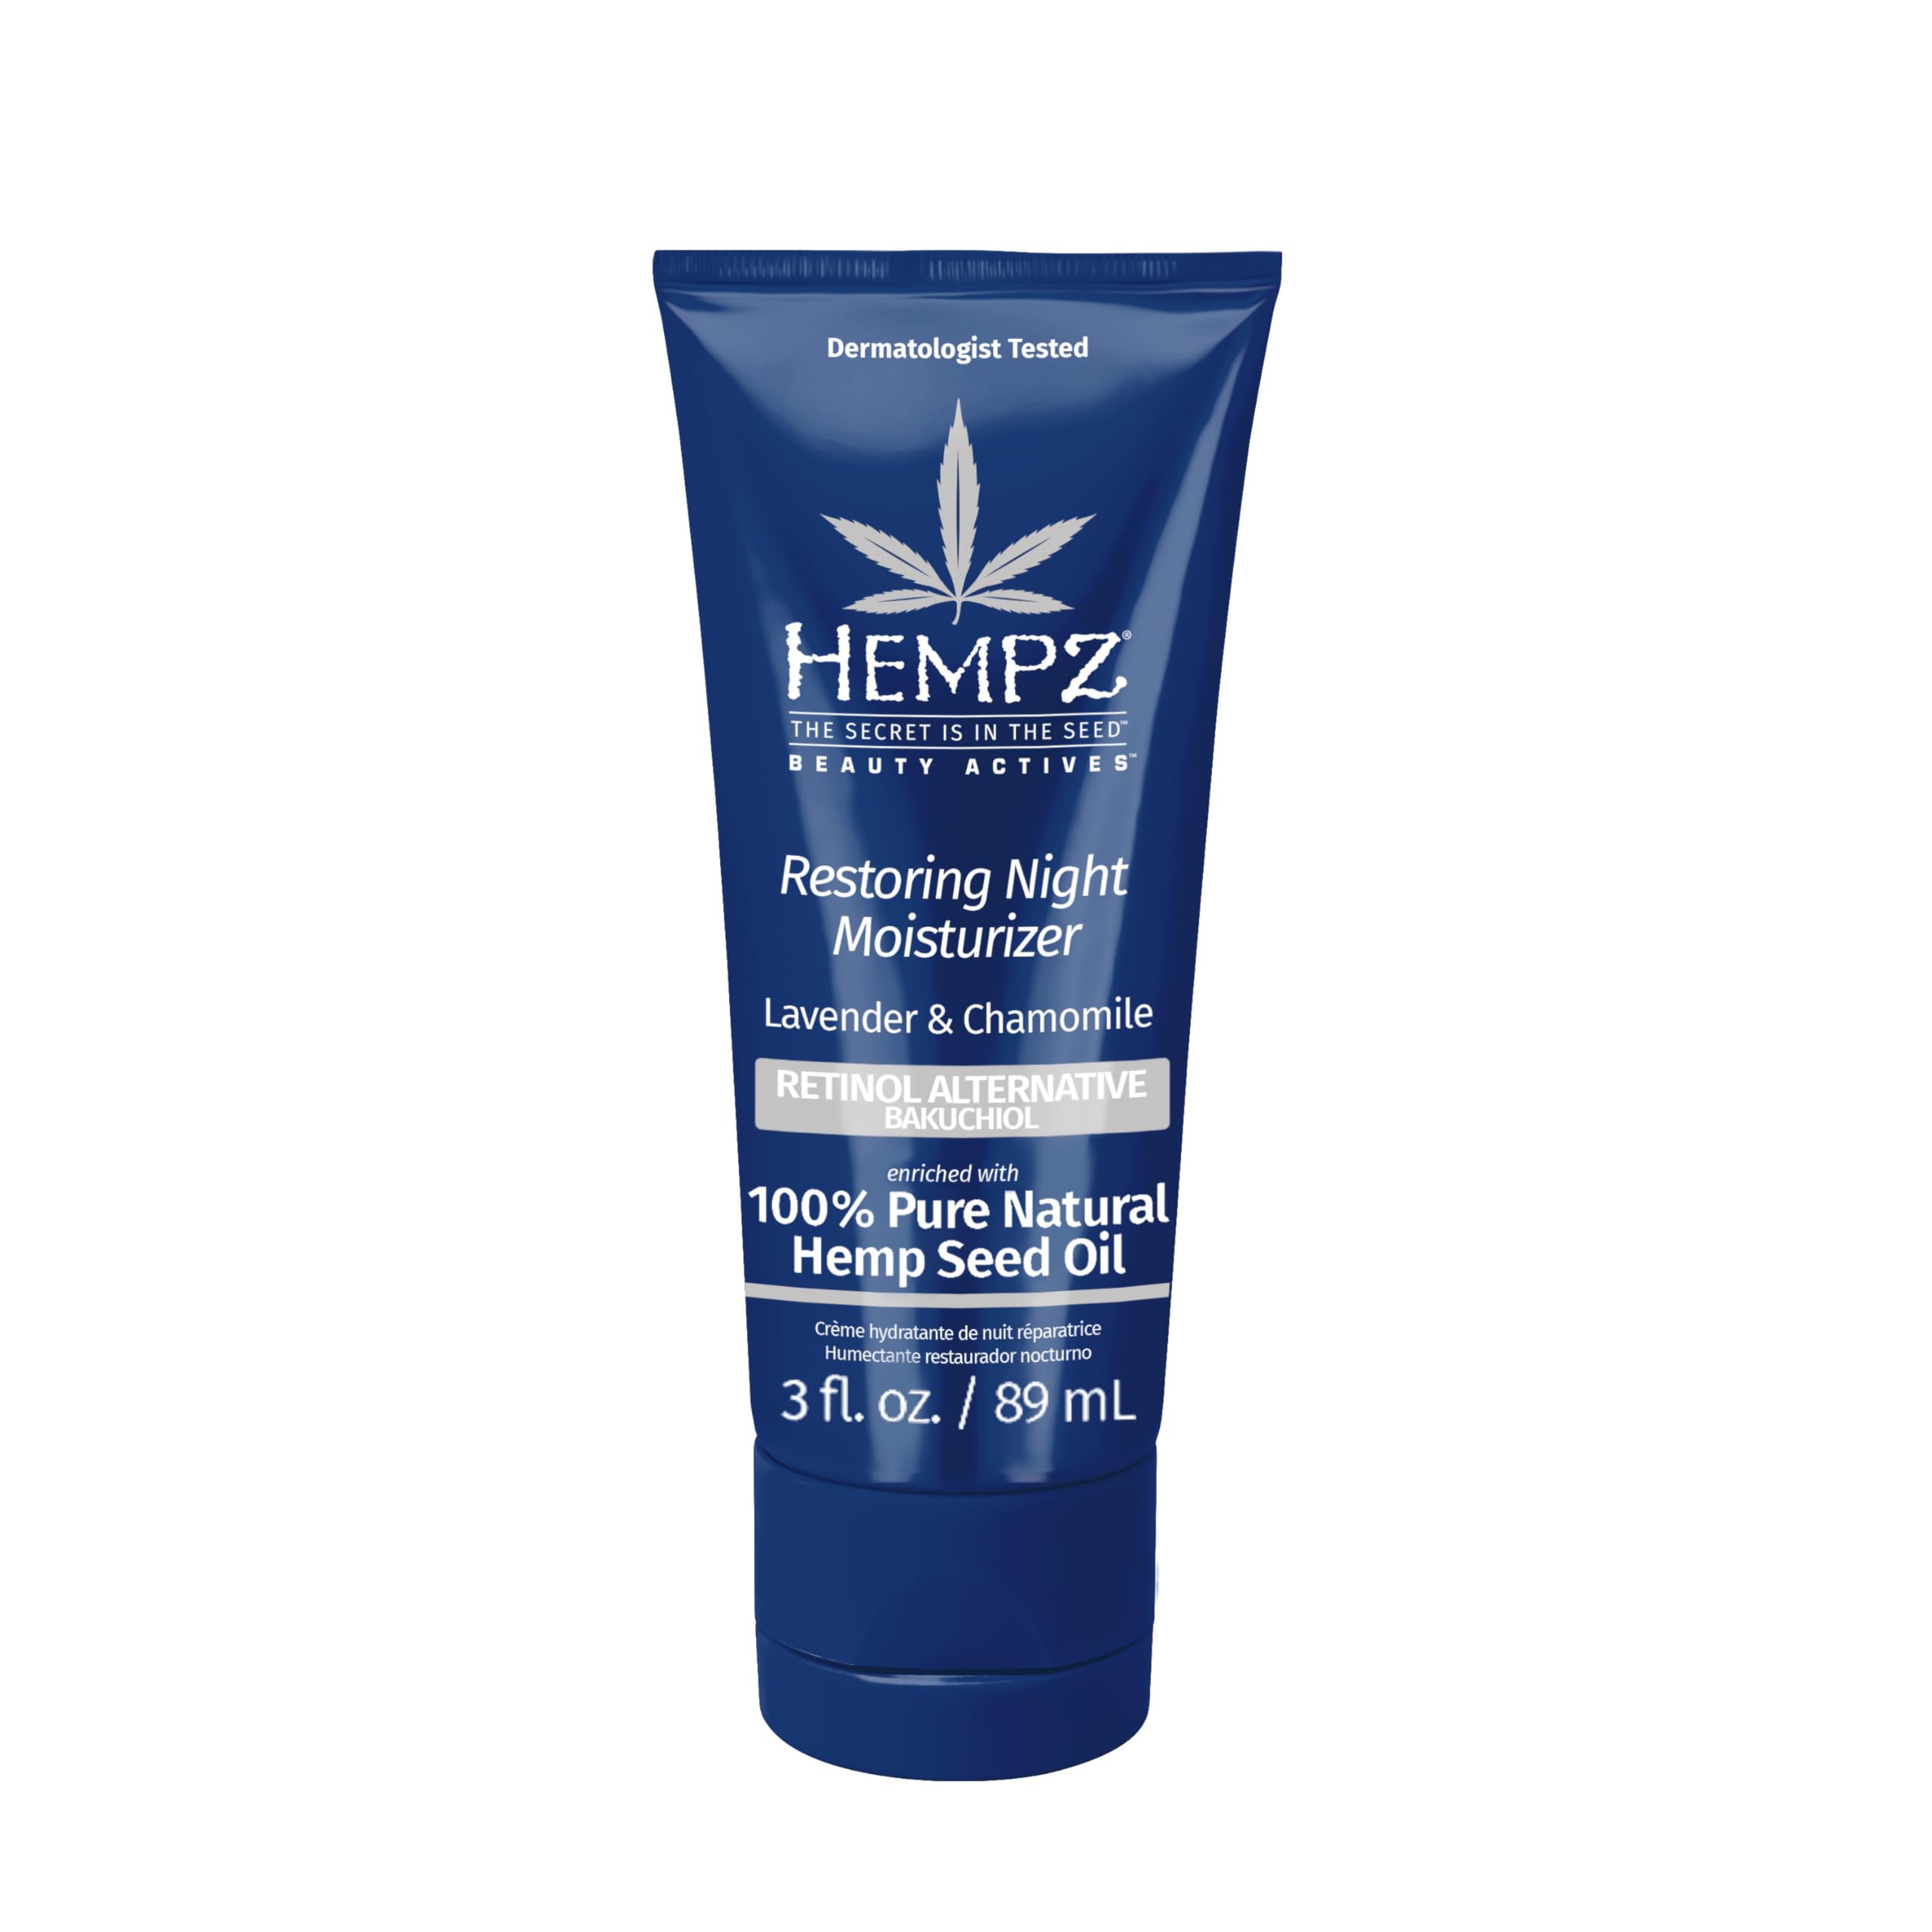 Hempz Lavender & Chamomile Restoring Night Moisturizer - Hydrating Night Cream Rich with Minerals, Vitamin C, & Hempseed Oil to Hydrate & Repair Extremely Dry or Sensitive Skin, for Face & Body, 3 Oz